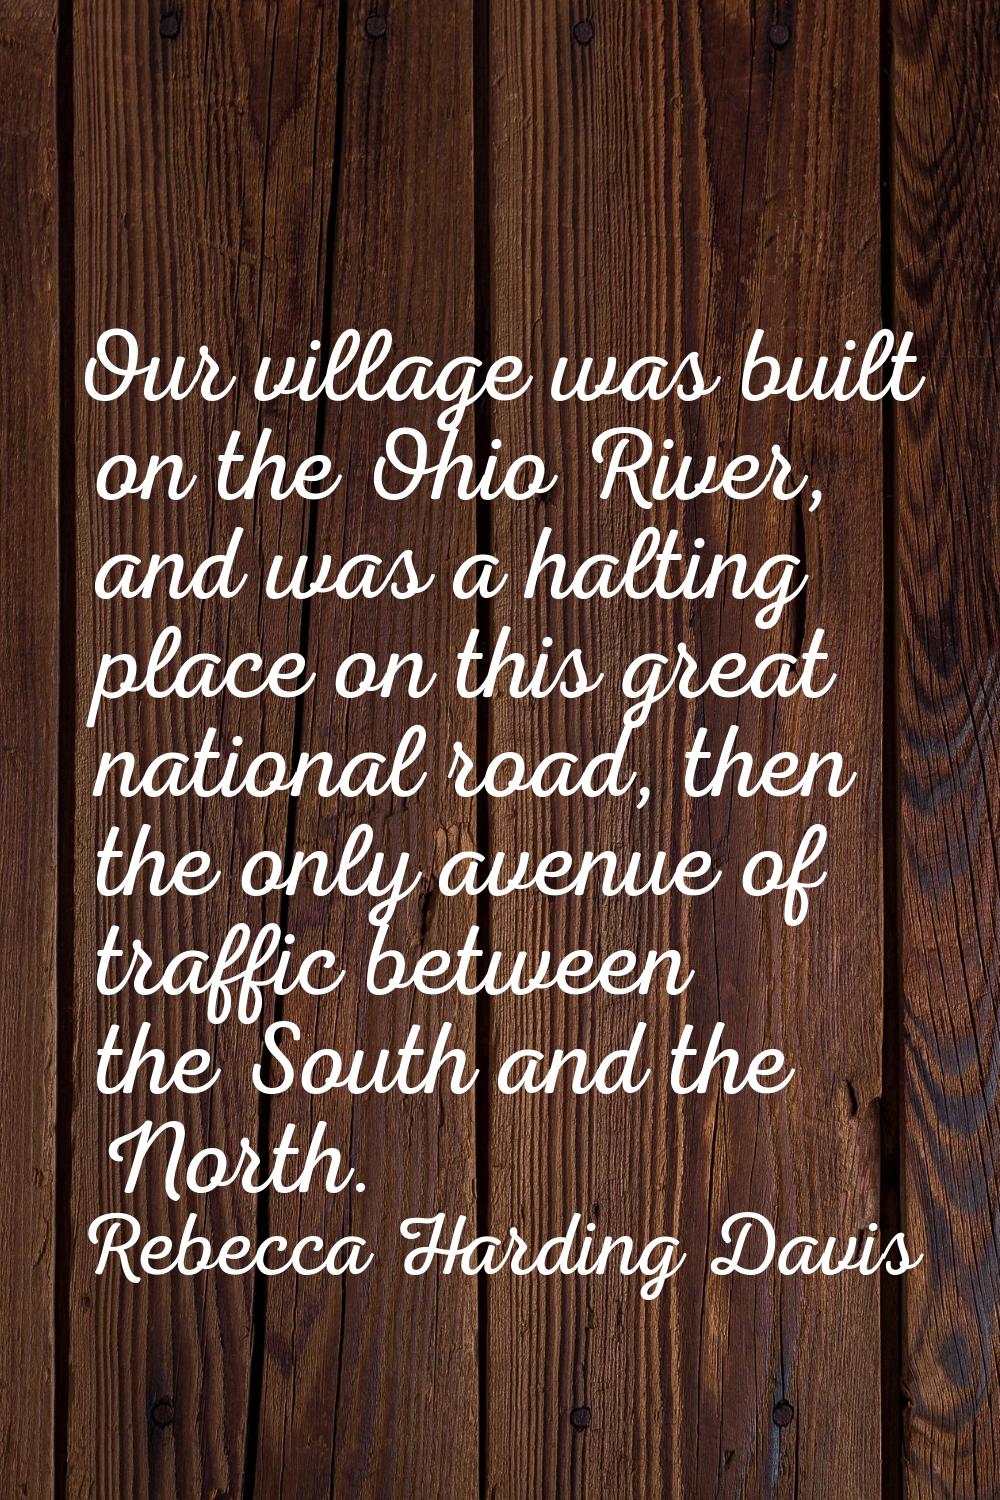 Our village was built on the Ohio River, and was a halting place on this great national road, then 